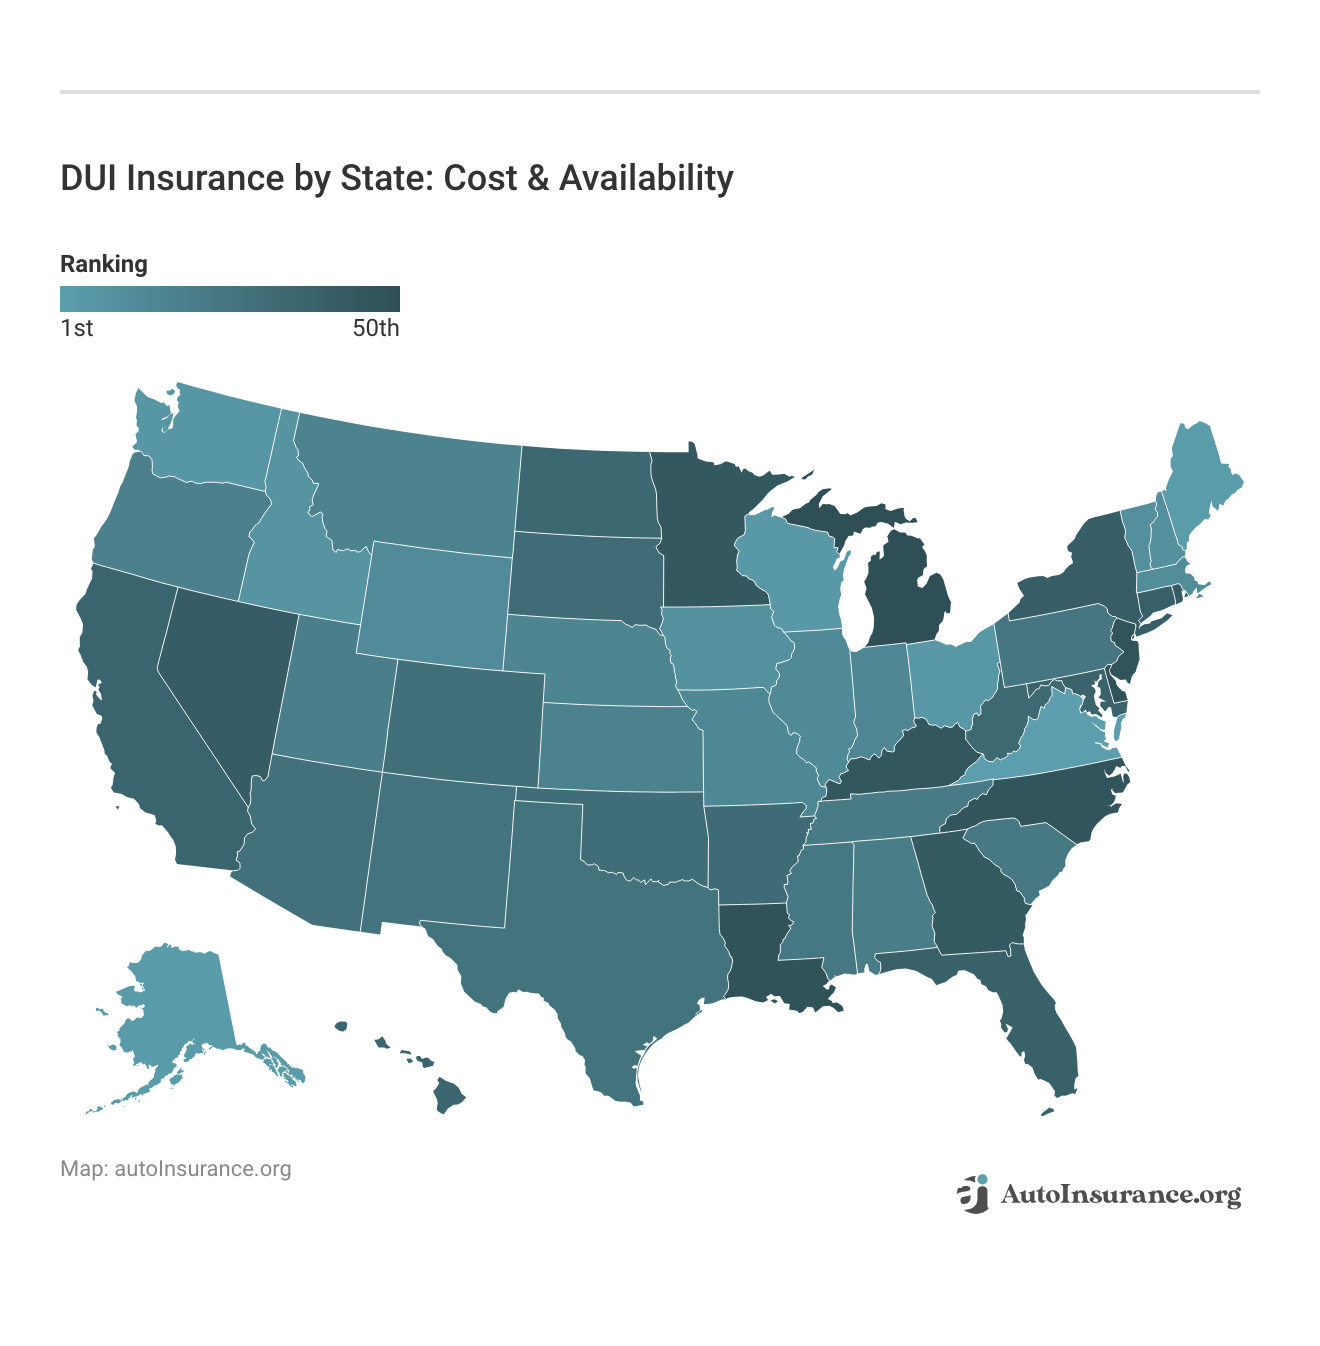 <h3>DUI Insurance by State: Cost & Availability</h3>